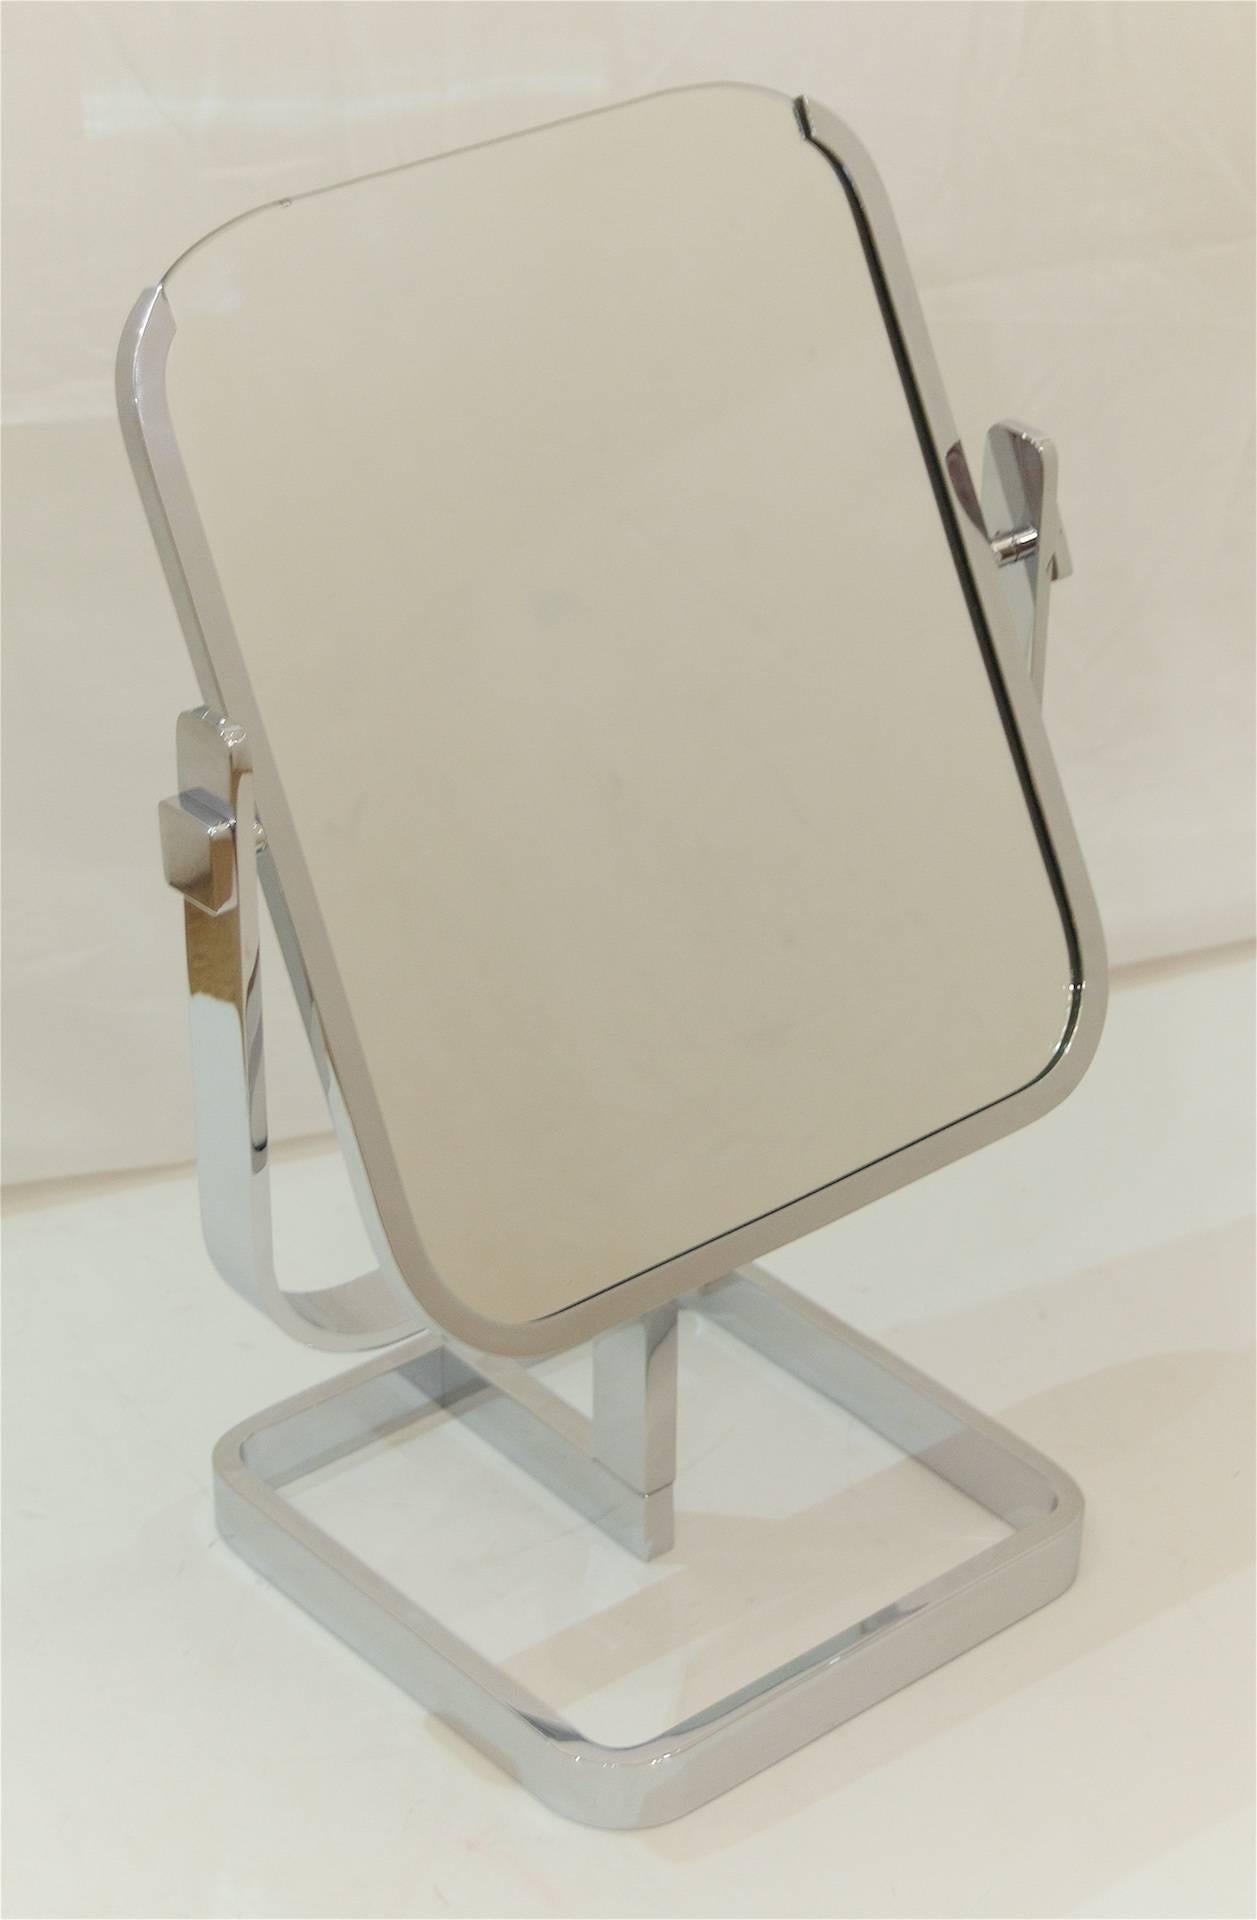 Well-sized vintage department store tabletop vanity mirror, the double-sided mirror mounted in a chrome rail on three sides and supported by a yoke base.